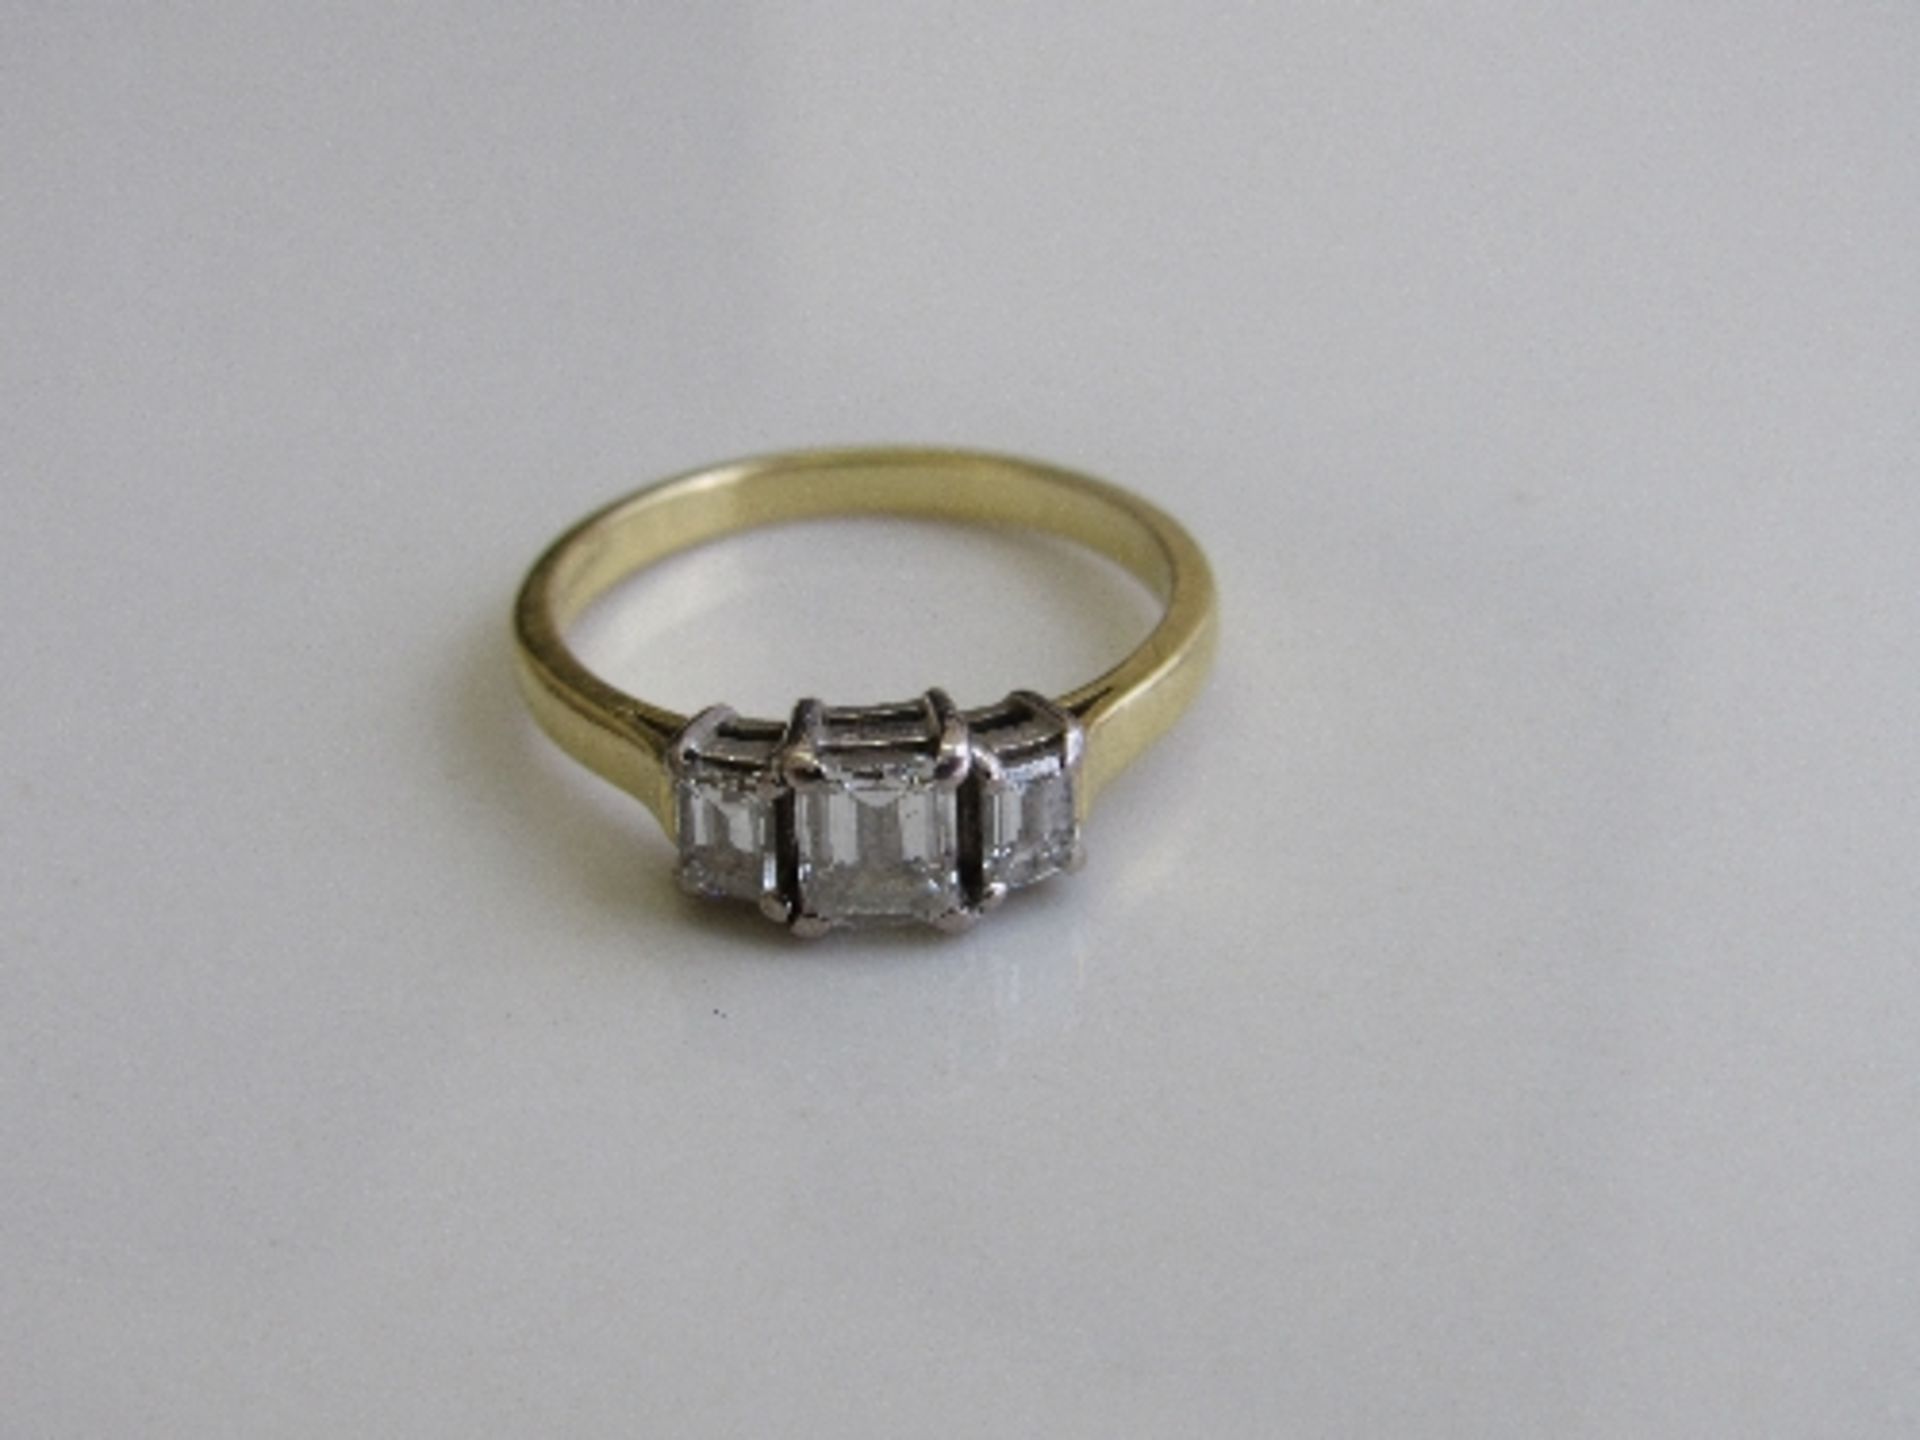 18ct gold & platinum Art Deco-style ring with 3 baguette cut diamonds, size N 1/2, weight 3.3gms. - Image 2 of 4